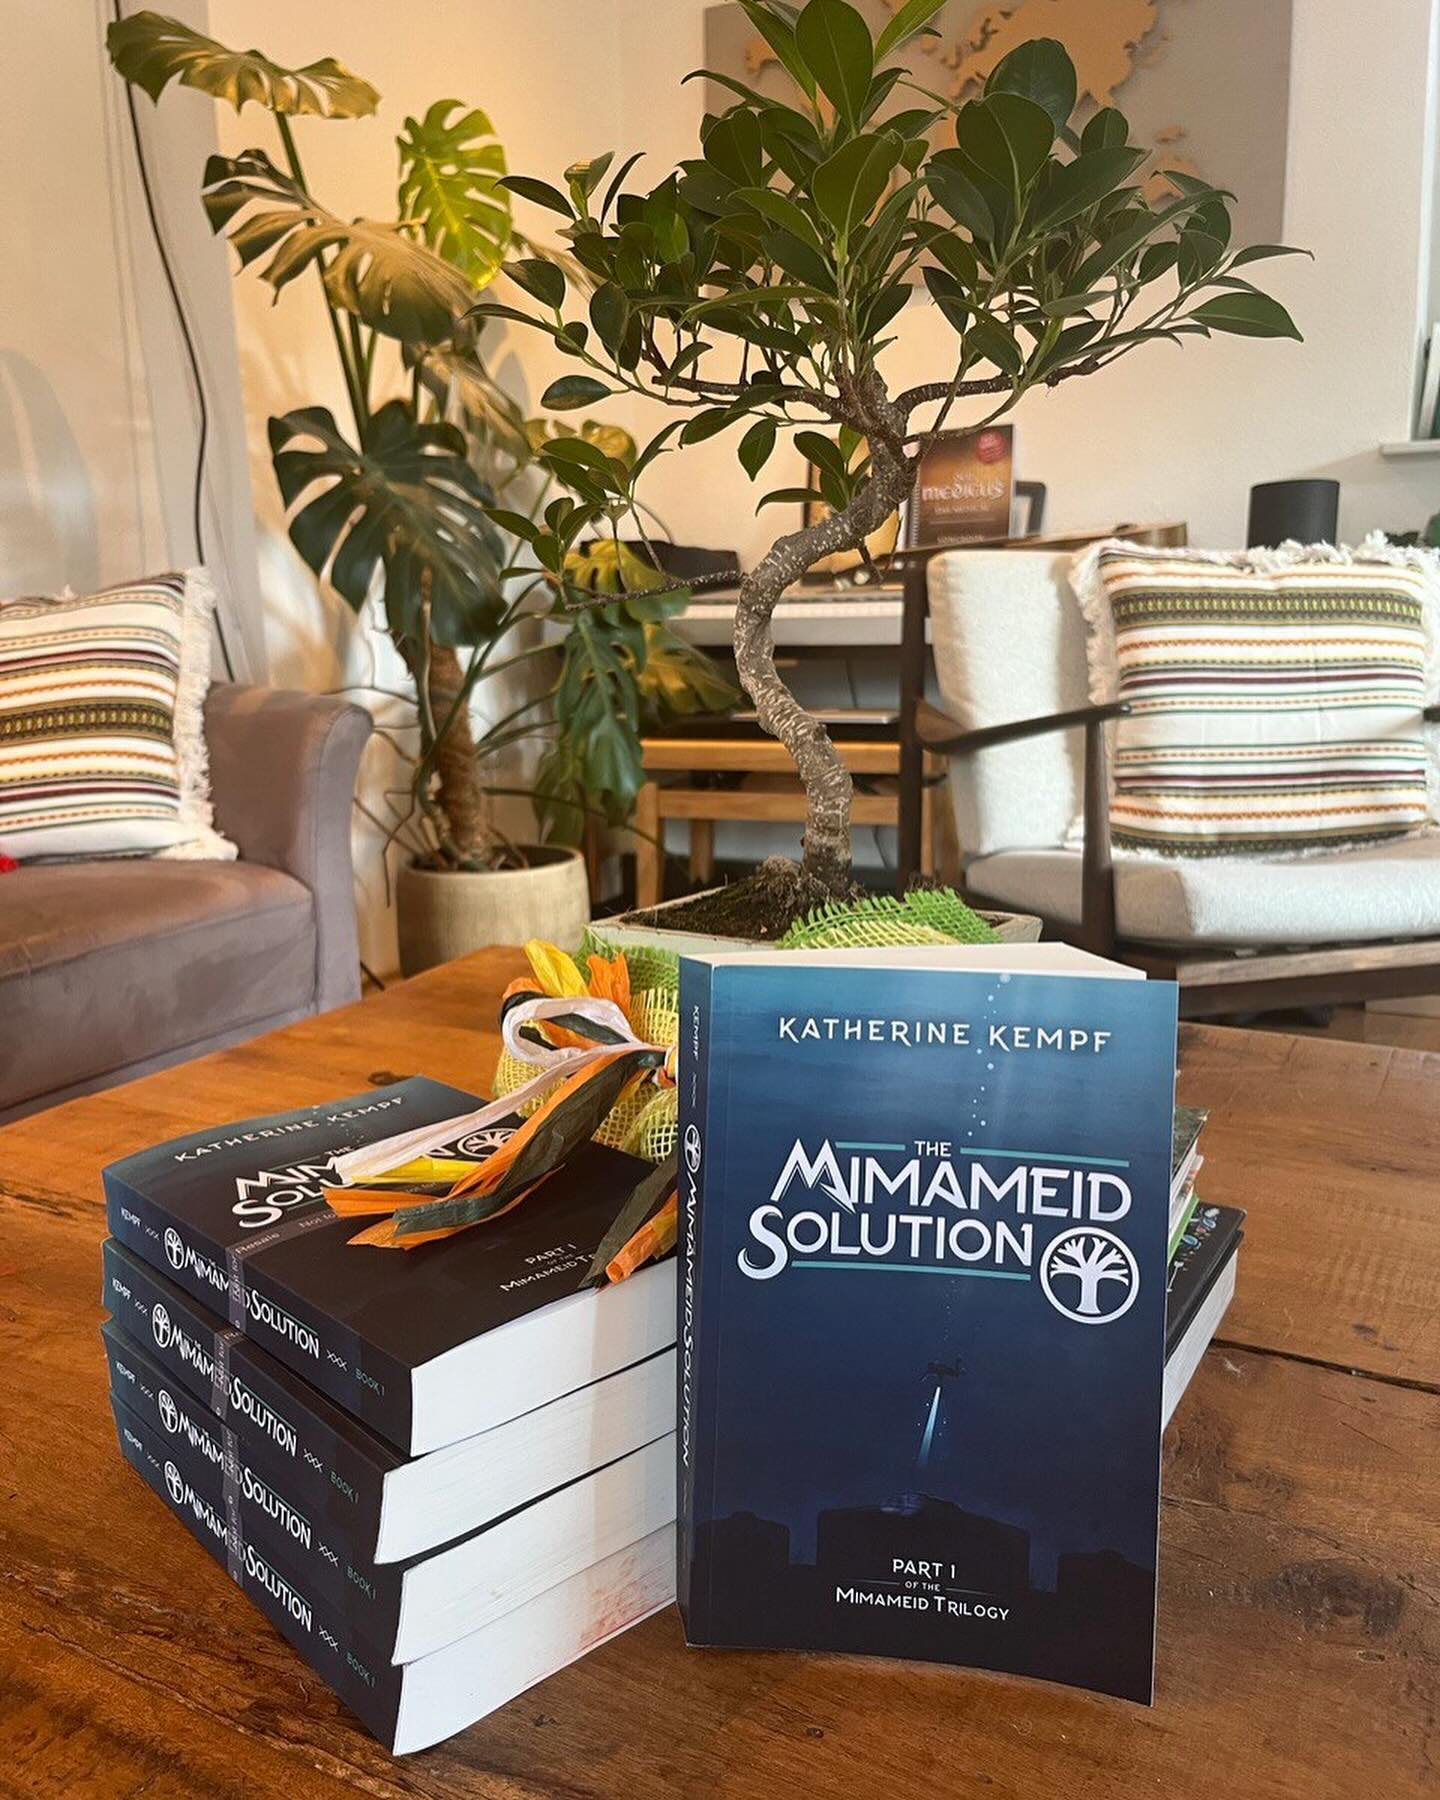 Happy Anniversary to The Mimameid Solution 🔥
.
Here are the numbers:
486 new friends
253 books sold
38 amazon ratings
23 goodreads reviews
4 more WIPs
1 book
.
It&rsquo;s been one year since my debut was sent out into the universe and I became a pub